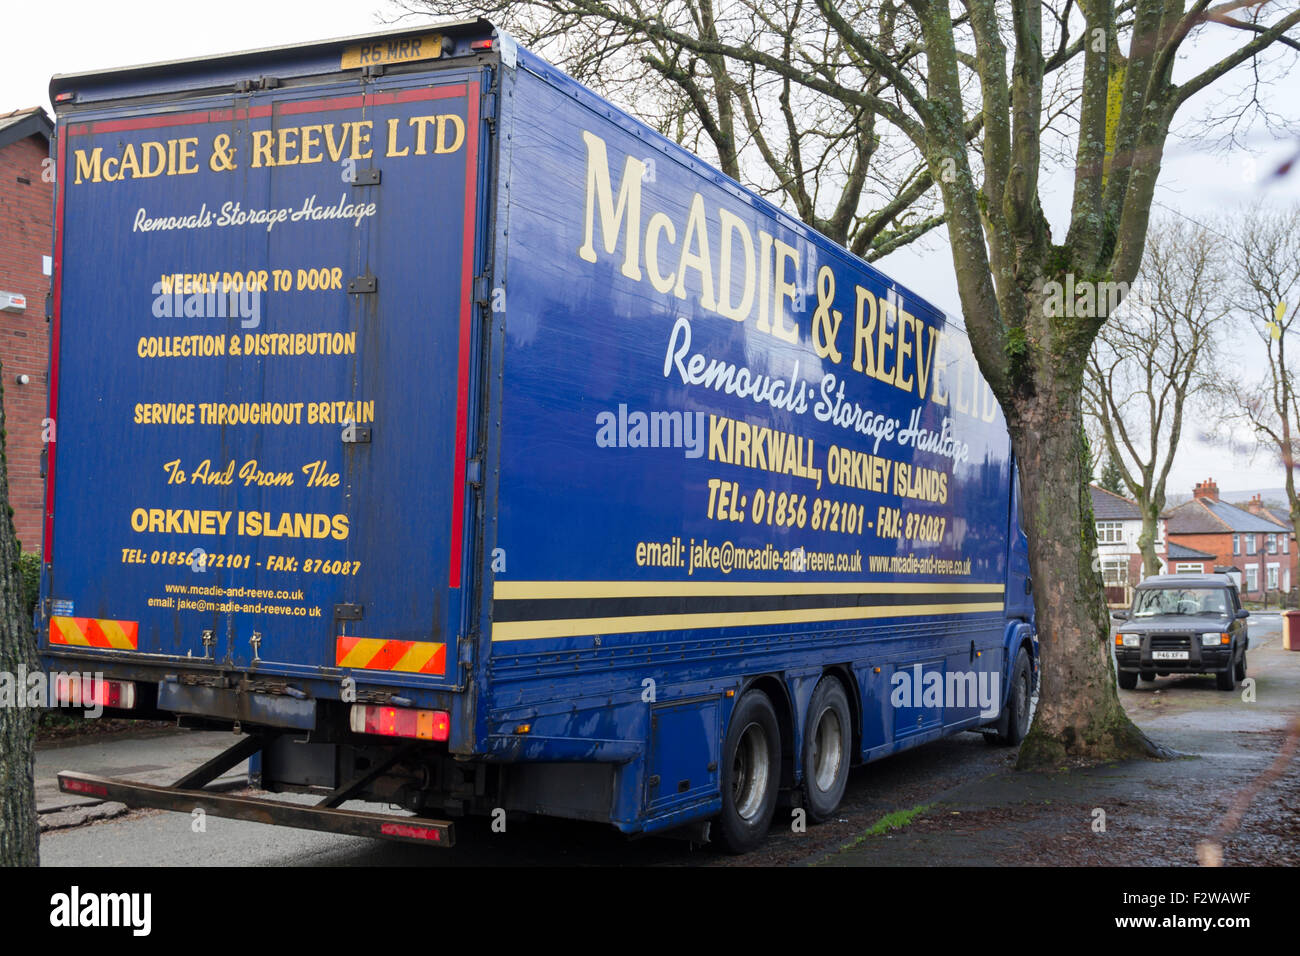 Orkney Islands based company, McAdie & Reeve Ltd storage, haulage and removals lorry parked in a narrow suburban street. Stock Photo